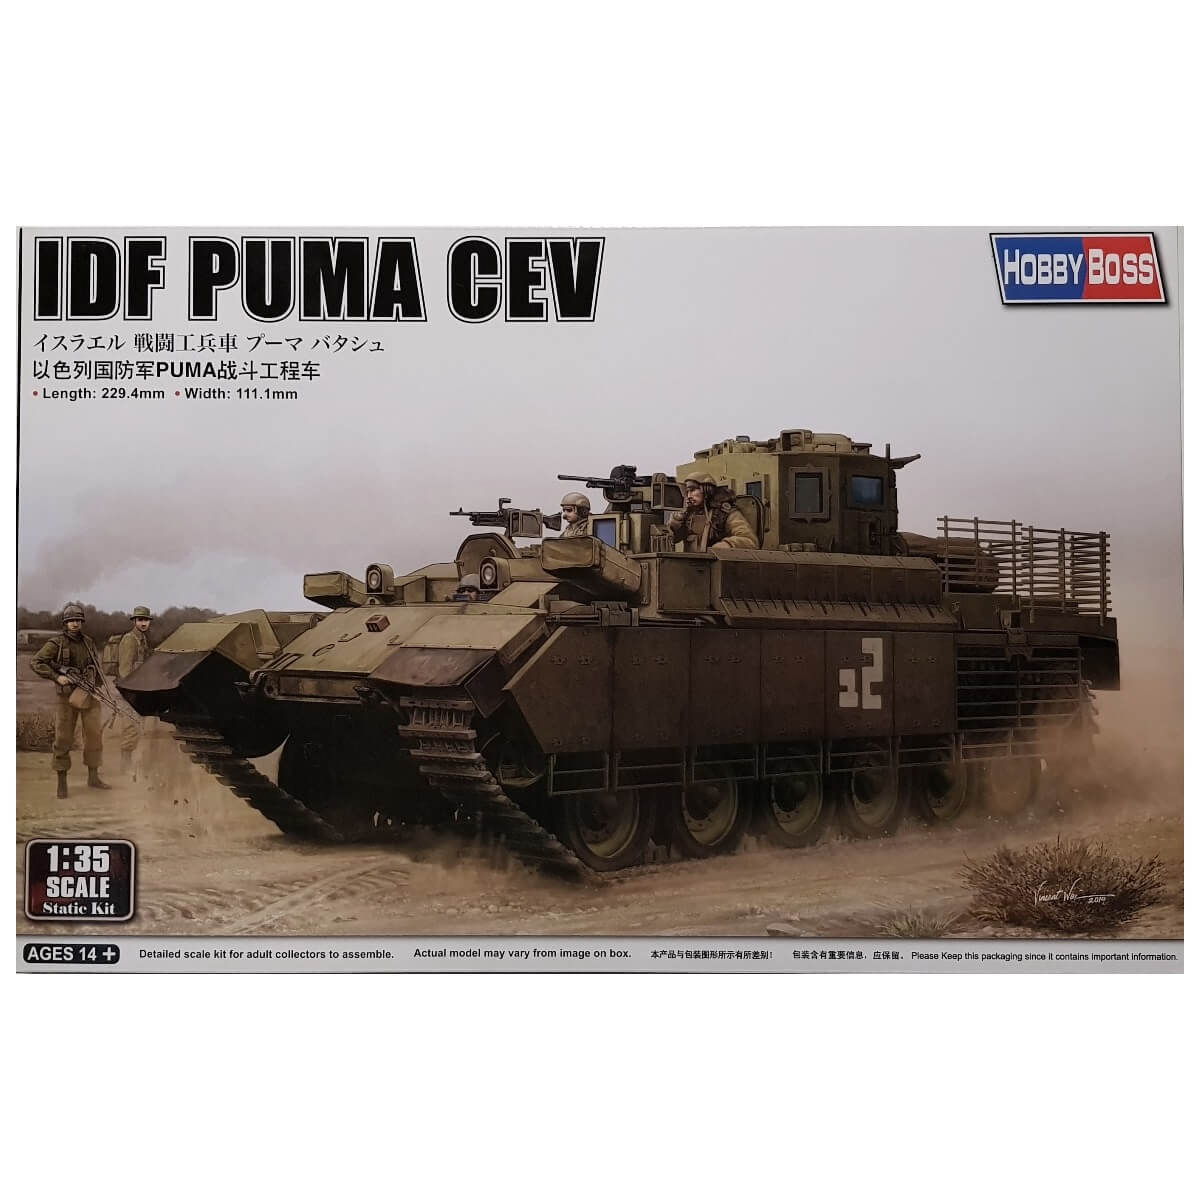 Calamiteit inval aanval 1:35 IDF Puma CEV - HOBBY BOSS – one35scale